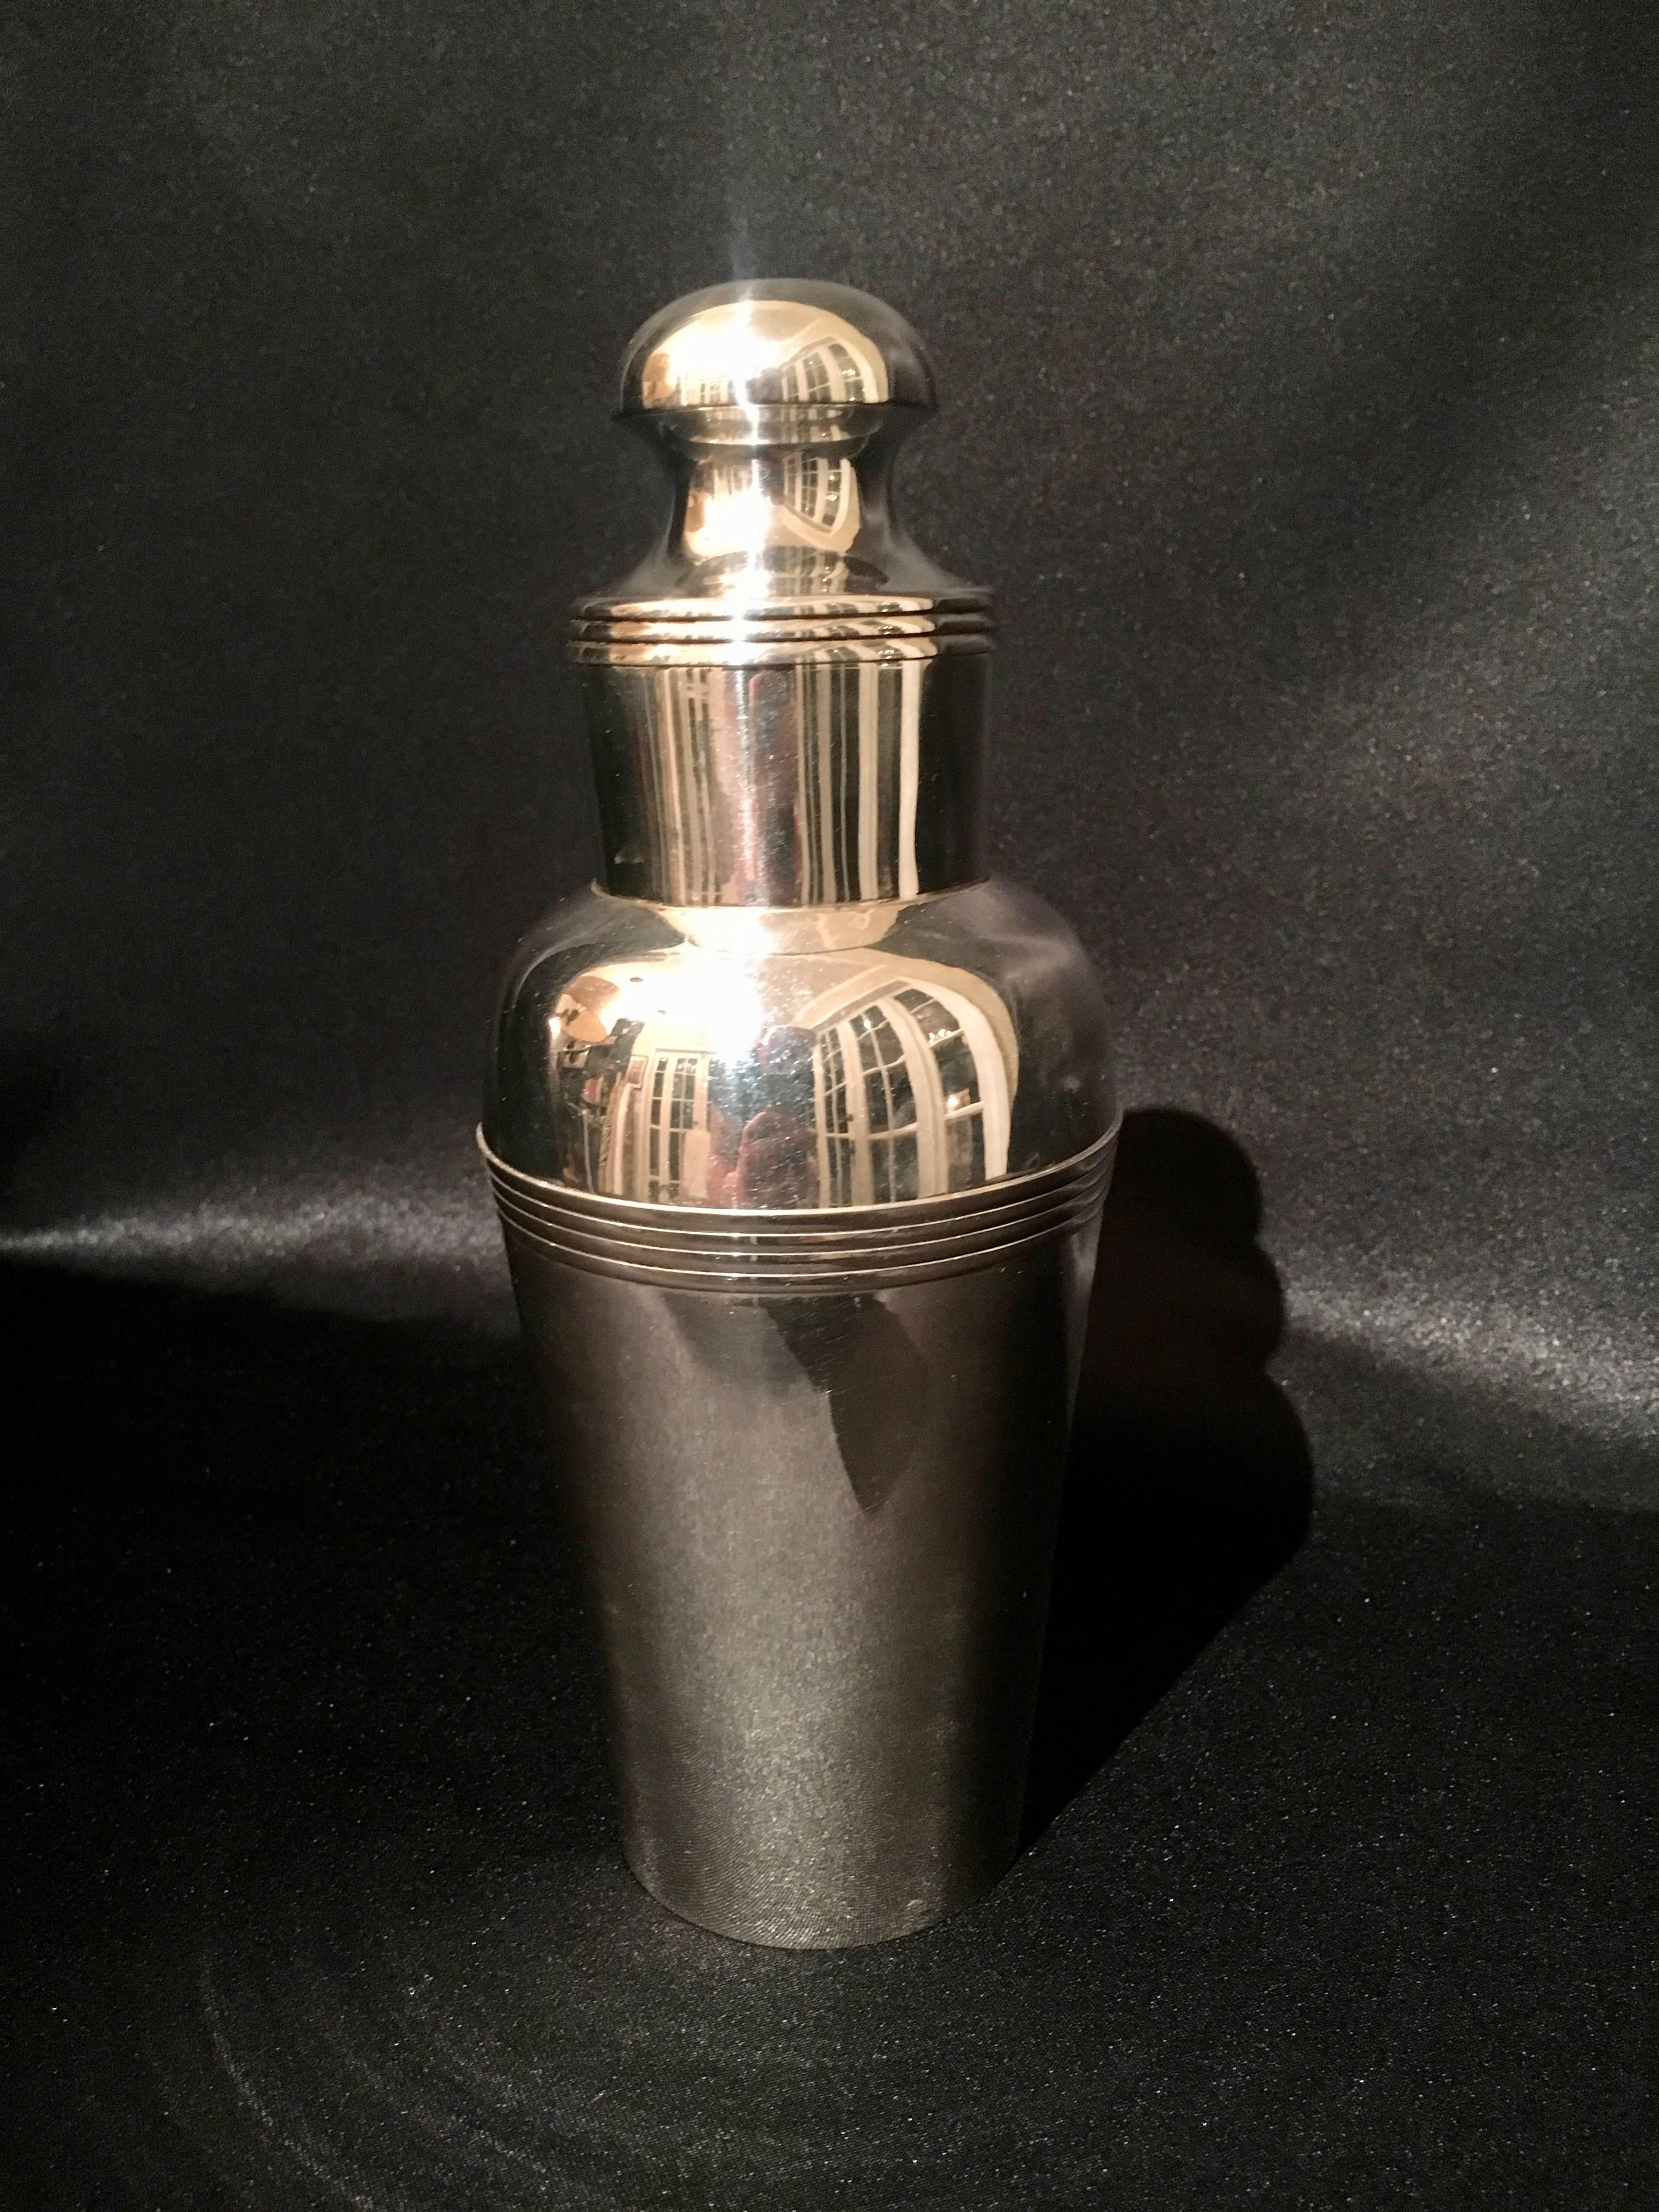 Silver Plate Cocktail Shaker - if you love to be the bartender or have a bar your friends envy - then your missing one thing!  This stunning Cocktail Shaker - truly a beauty!  The substantial metal framework is a gorgeous design befitting the